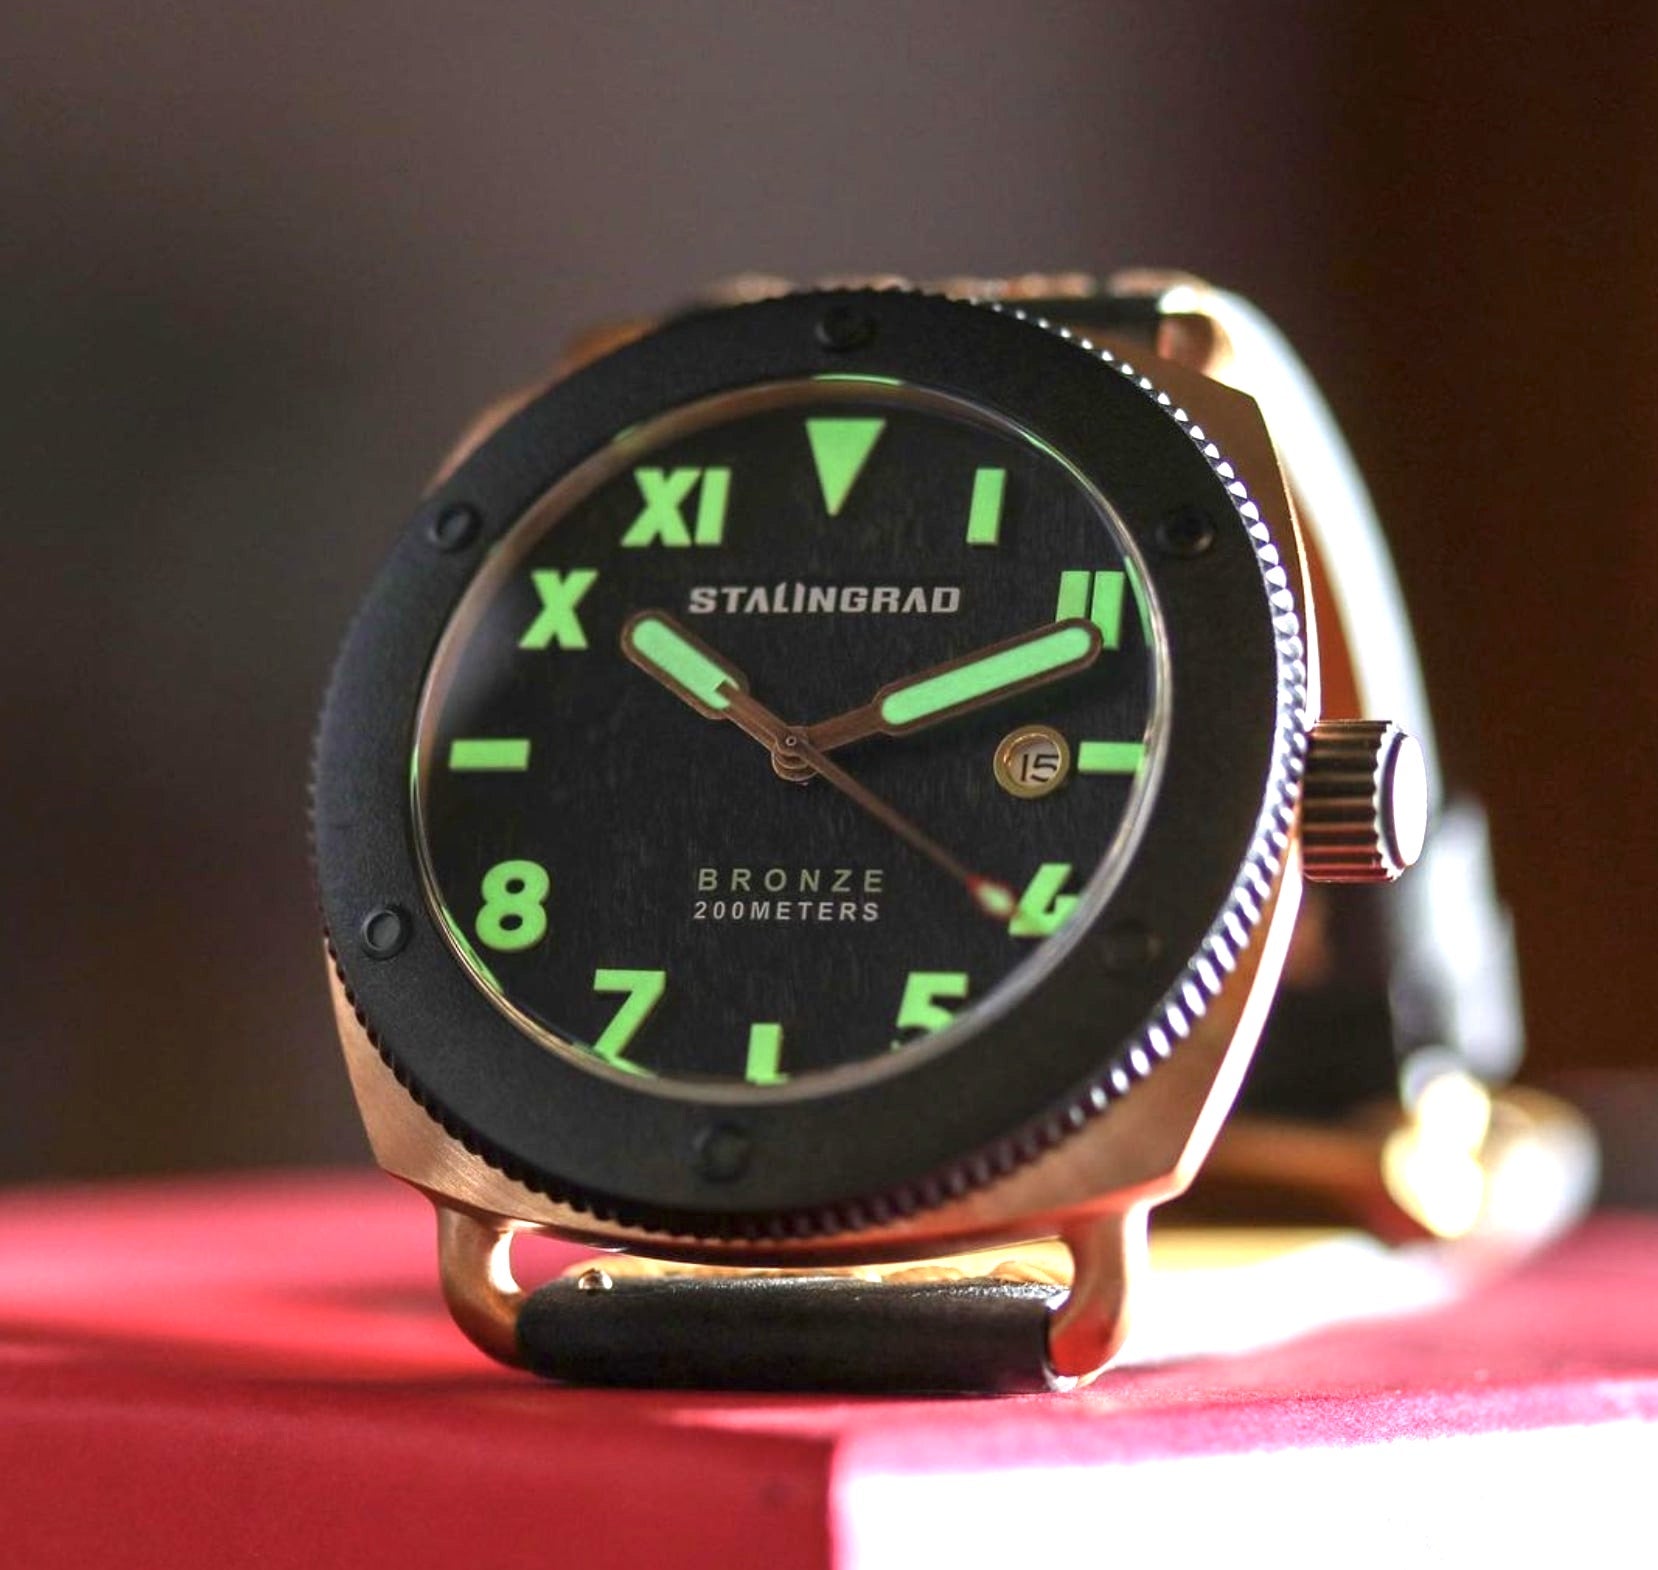 Stalingrad Bronze Defender 200m mens watch on a red table, with lume glowing on the hands and dial